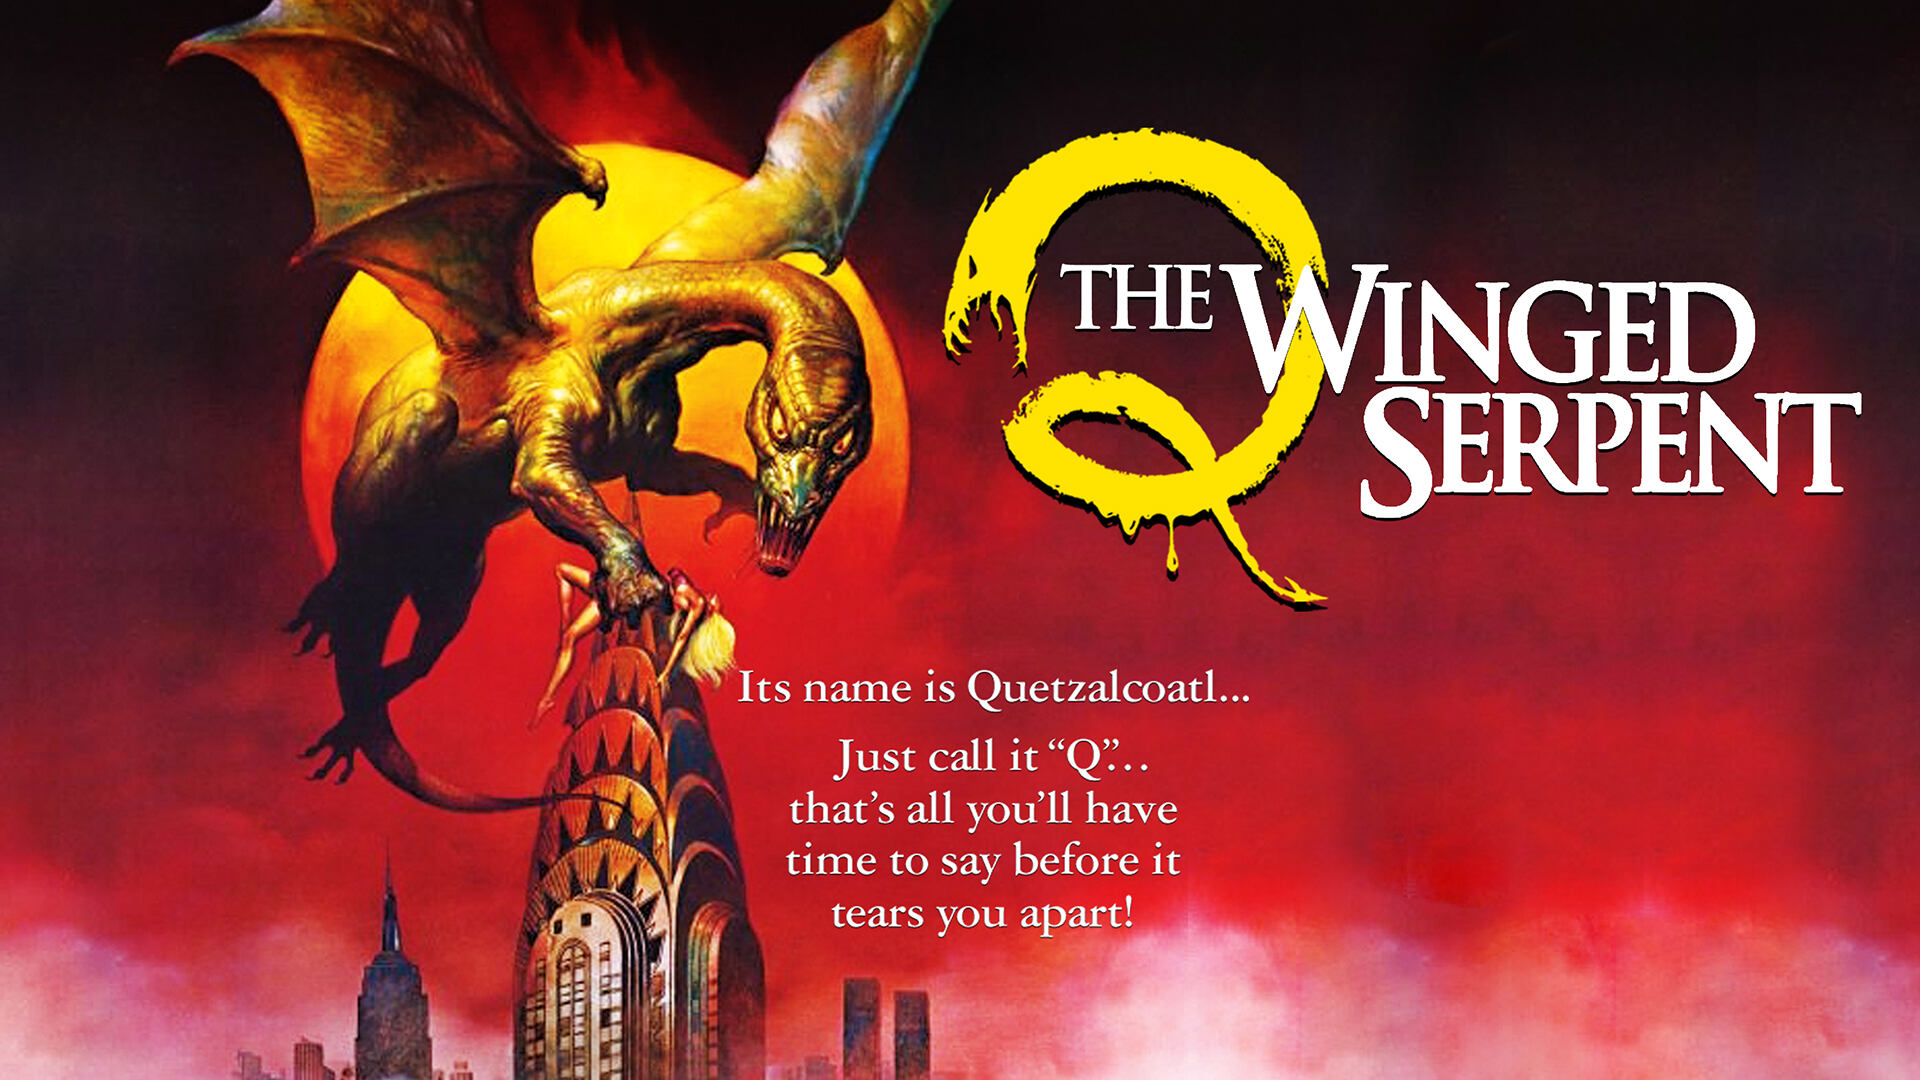 43-facts-about-the-movie-q-the-winged-serpent